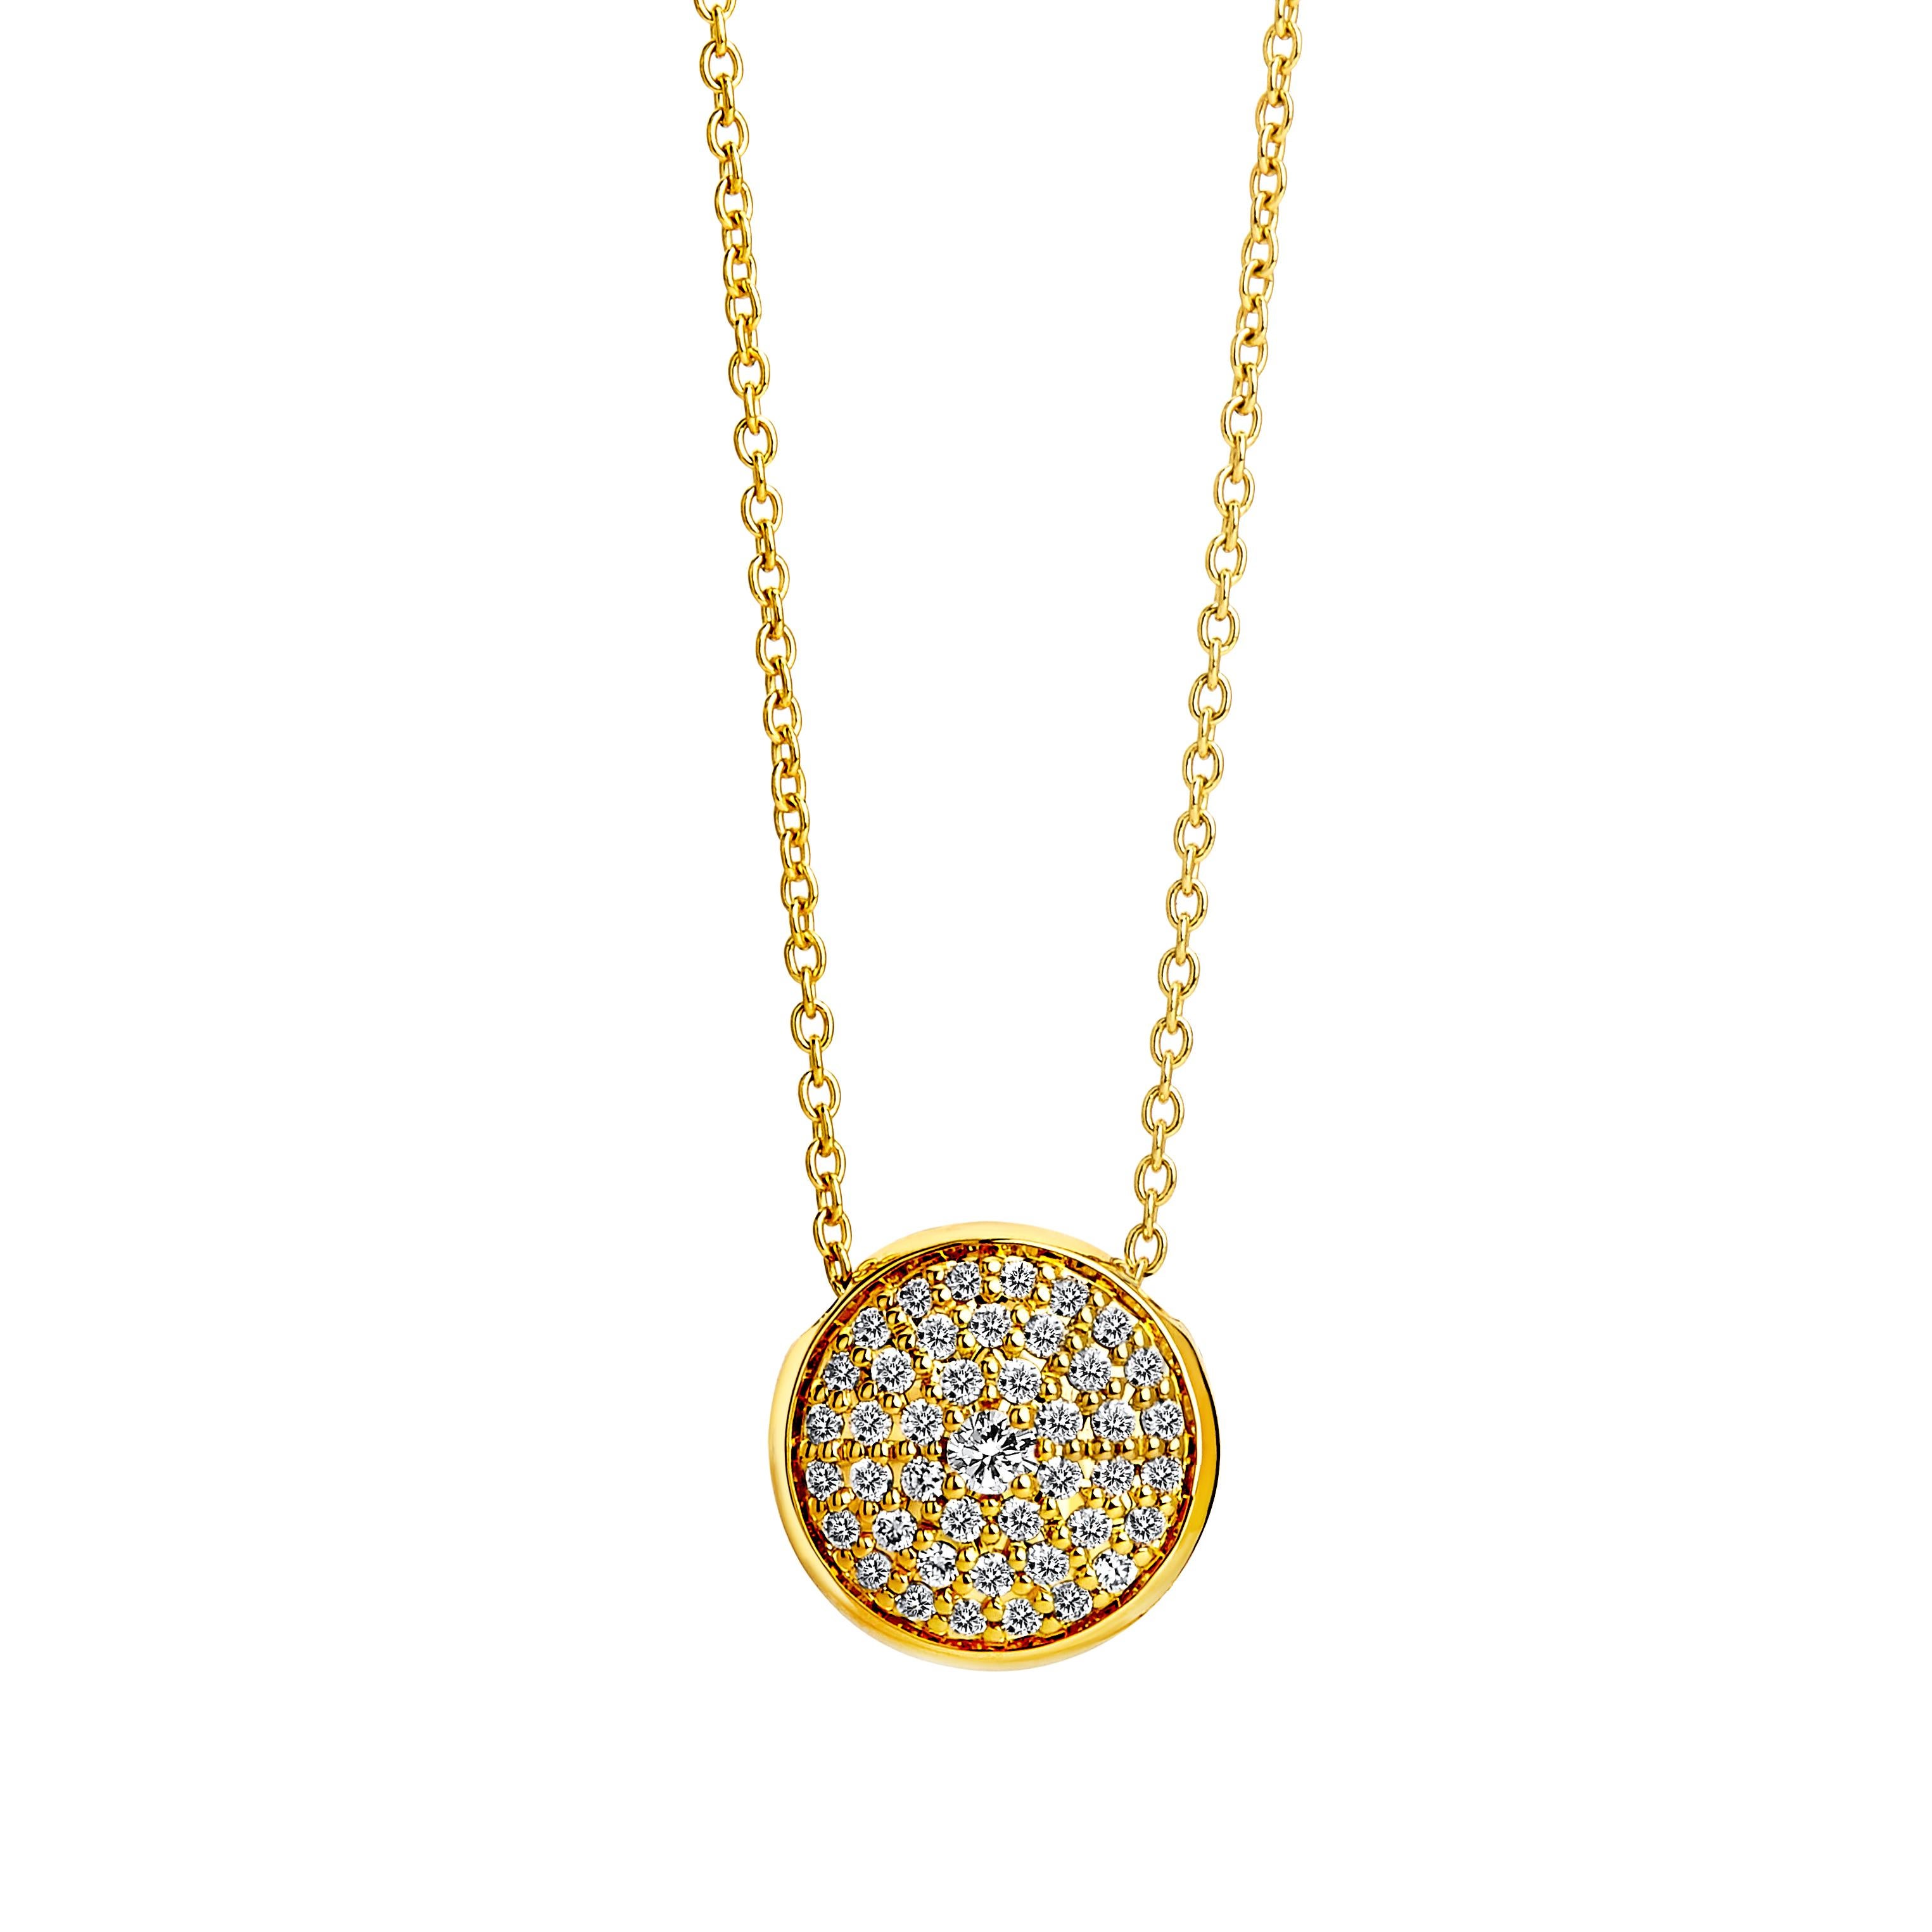 Created in 18 karat yellow gold
Black diamonds 0.35 ct approx
Diamonds 0.35 ct approx
18 inch chain with loops at 16th & 17th inch
Reversible necklace
Chain slides through the charm

Fashioned from 18 karat yellow gold, this reversible necklace